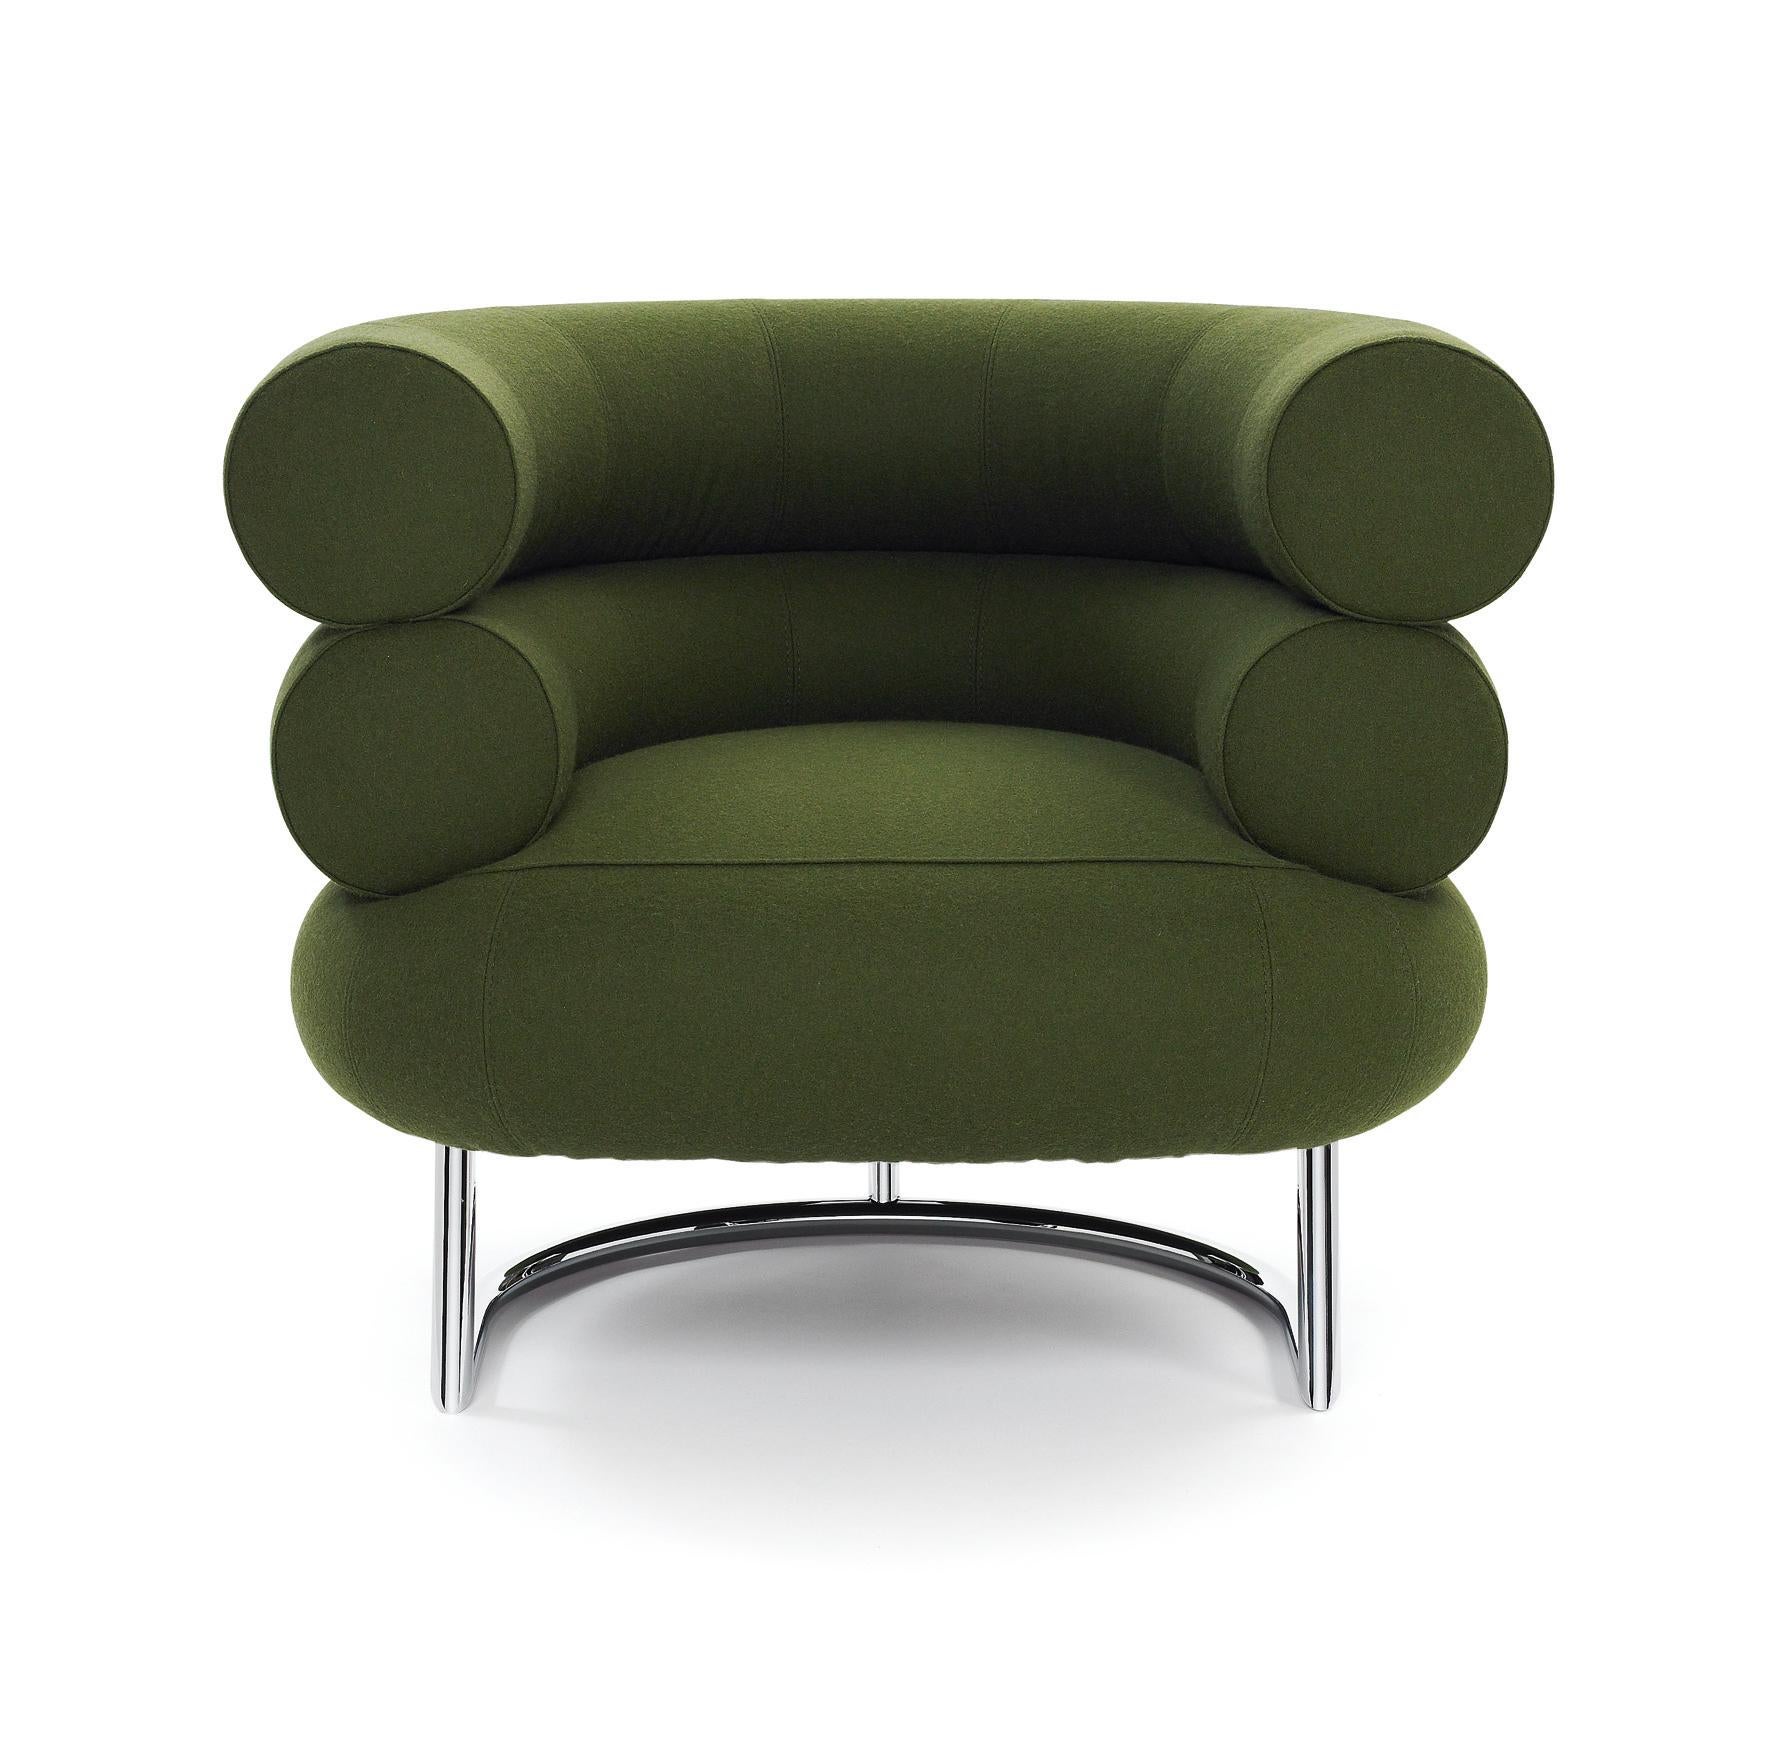 Bibendum is one of a kind. Nowhere in the history of design will one find an armchair that compares to this. It is captivatingly harmonious despite its size and unites a majestic impressiveness with charm and esprit like no other leather armchair.